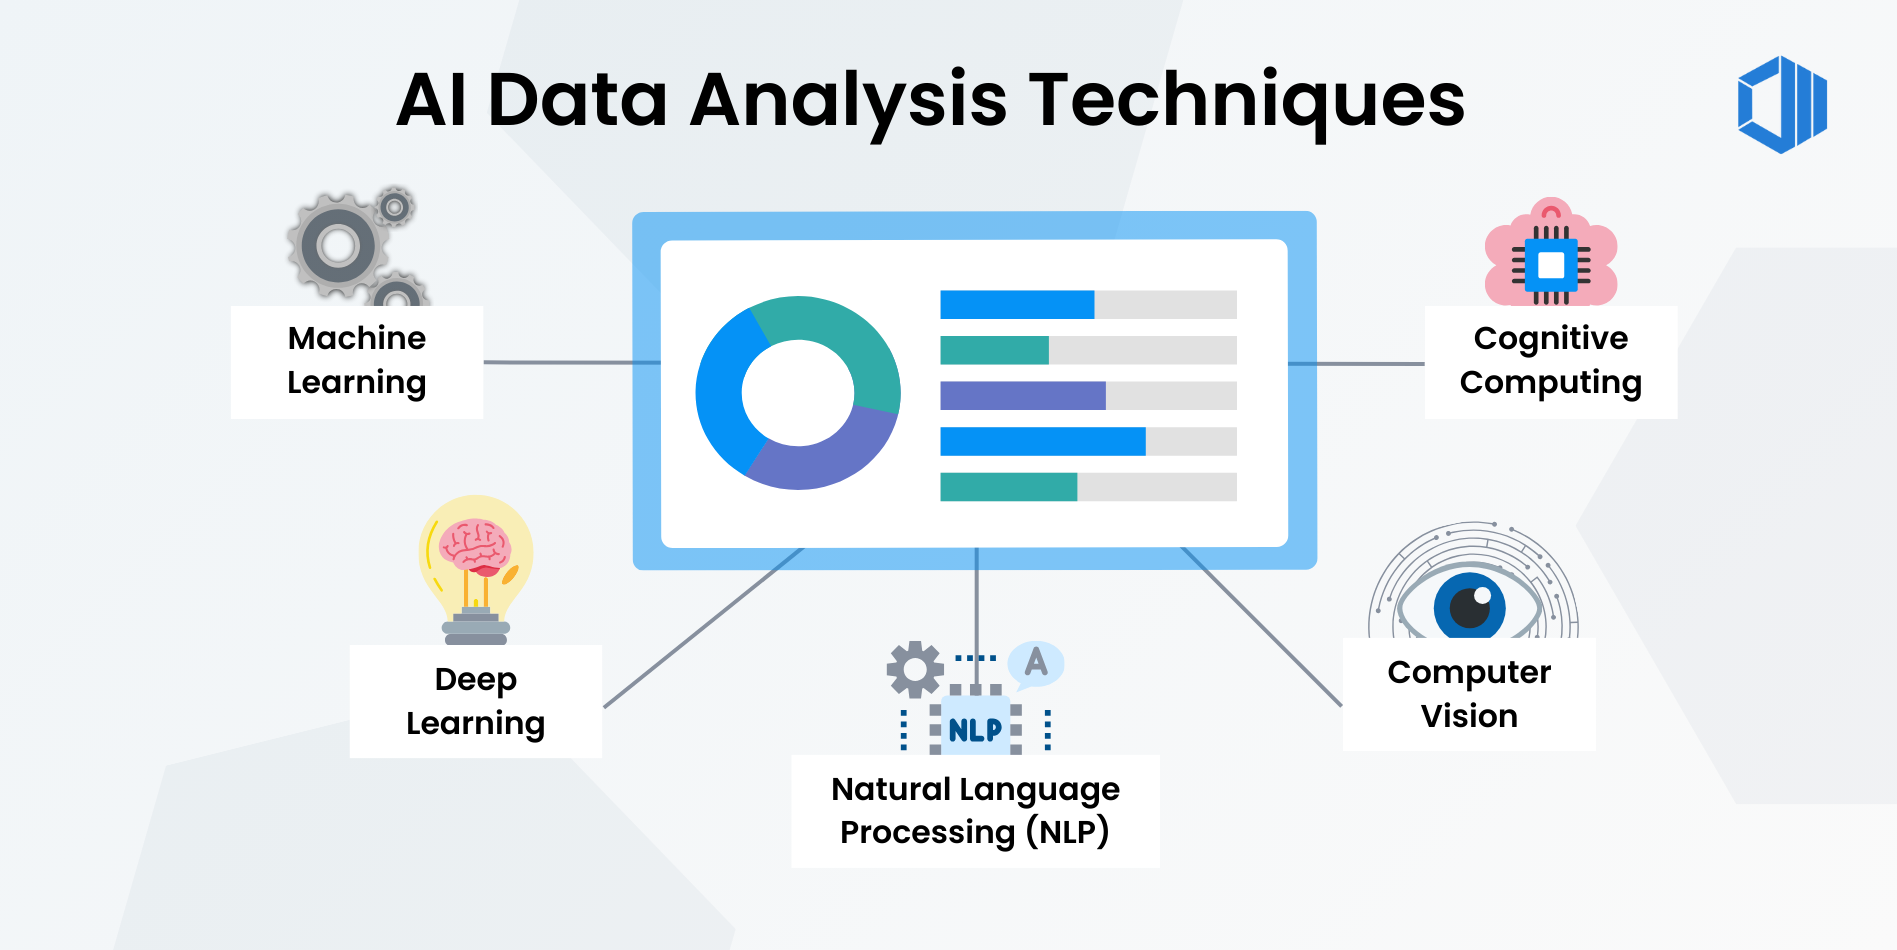 infographic - AI Data Analysis Techniques including machine learning, deep learning, NLP, cognitive computing, computer vision